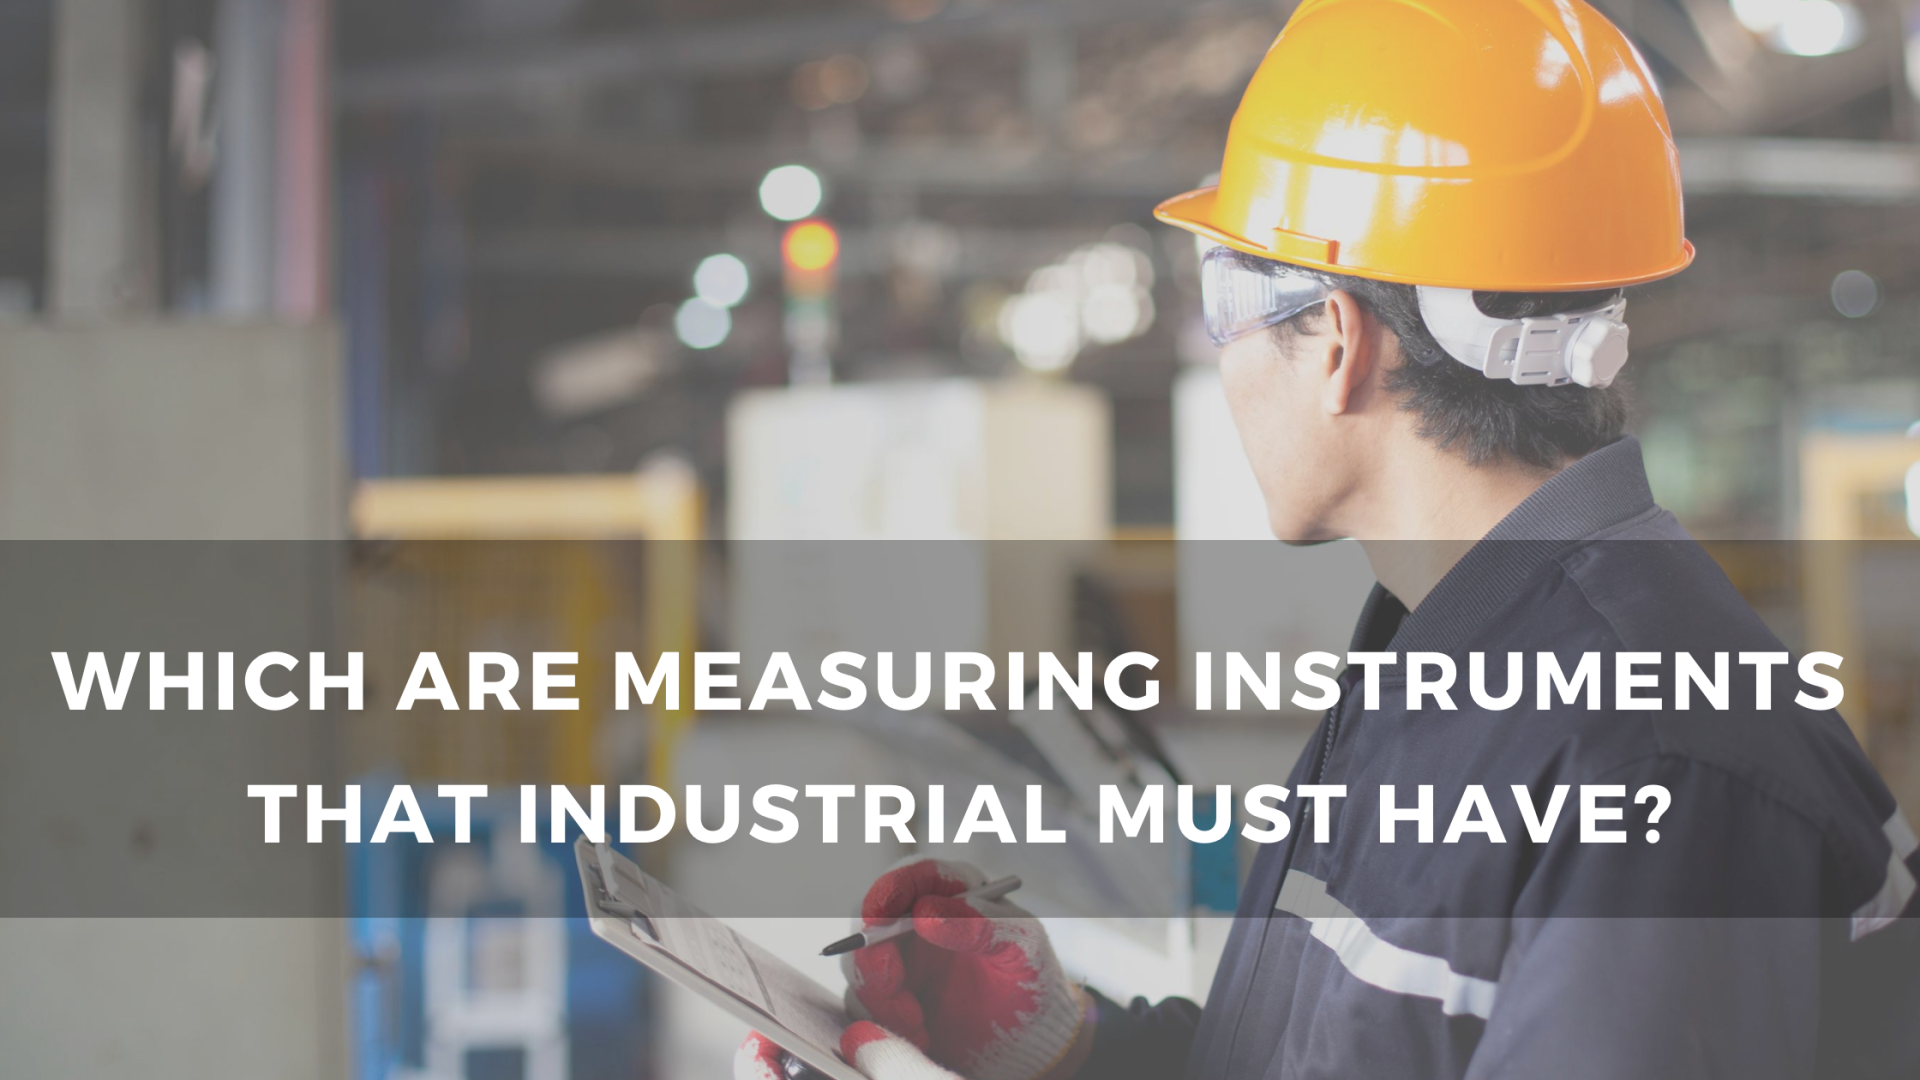 Which are measuring instruments that industrial must have?